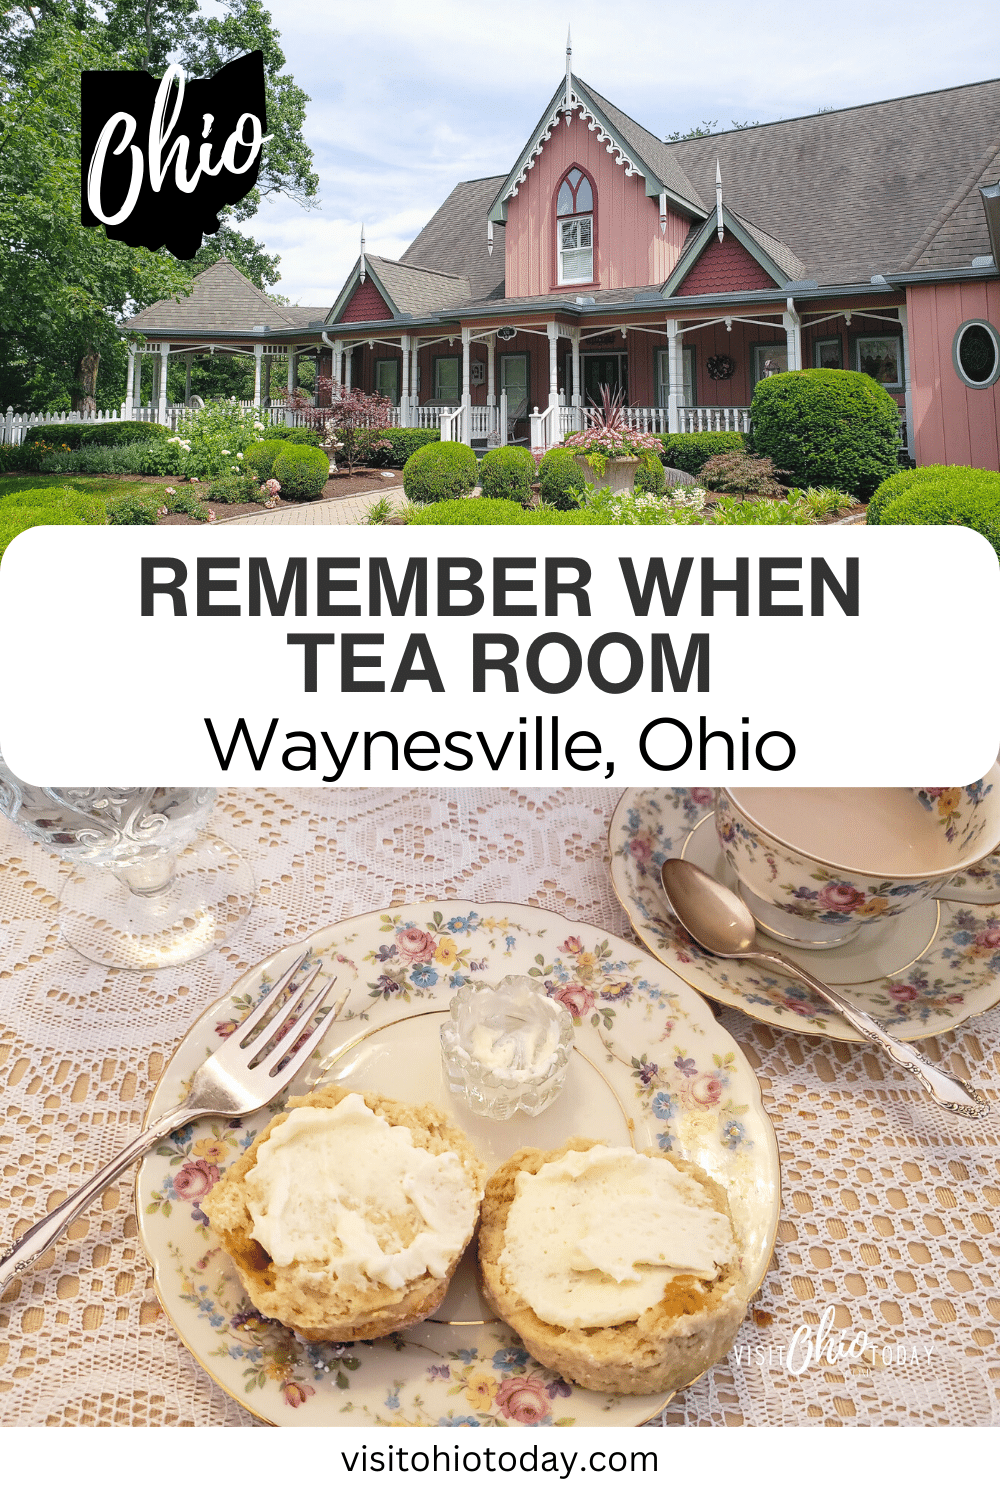 Remember When Tea Room is situated in Waynesville and offers delightful, old-fashioned afternoon teas. Make new memories at this homely venue.